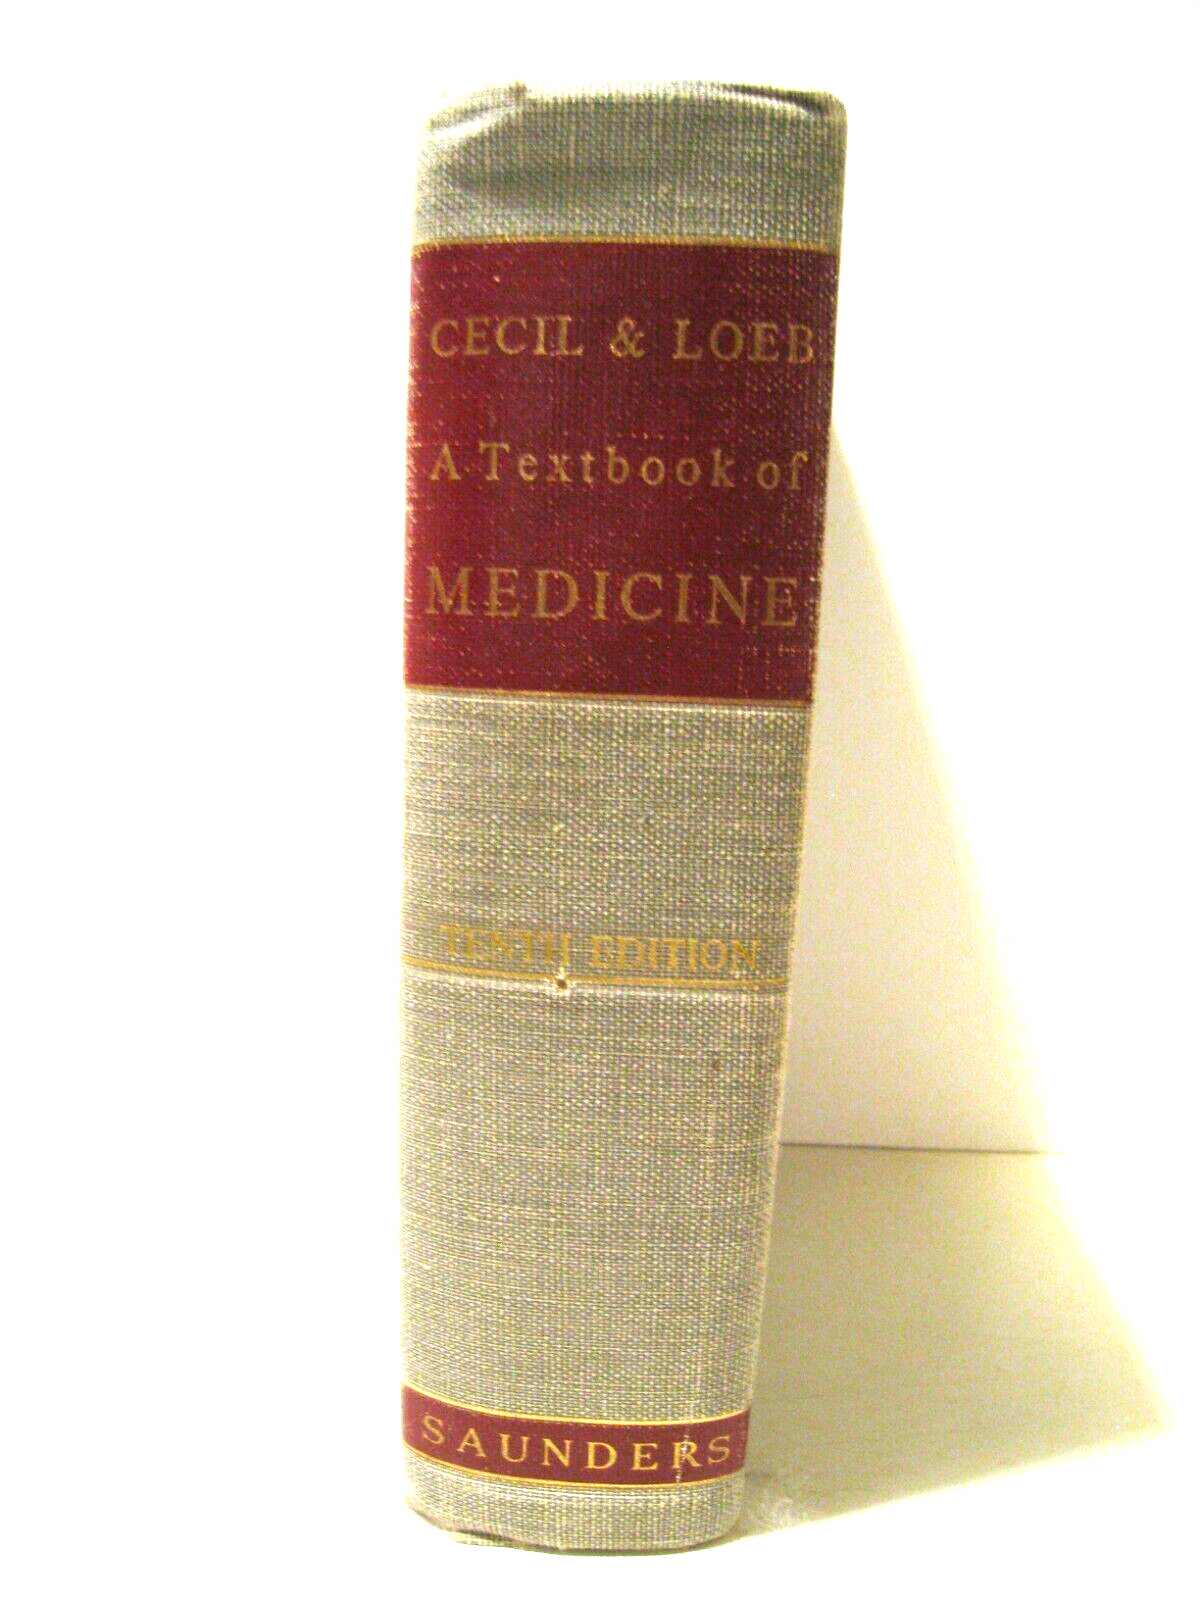 A Textbook of Medicine Cecil and Loeb Hardcover 10th Edition 1959